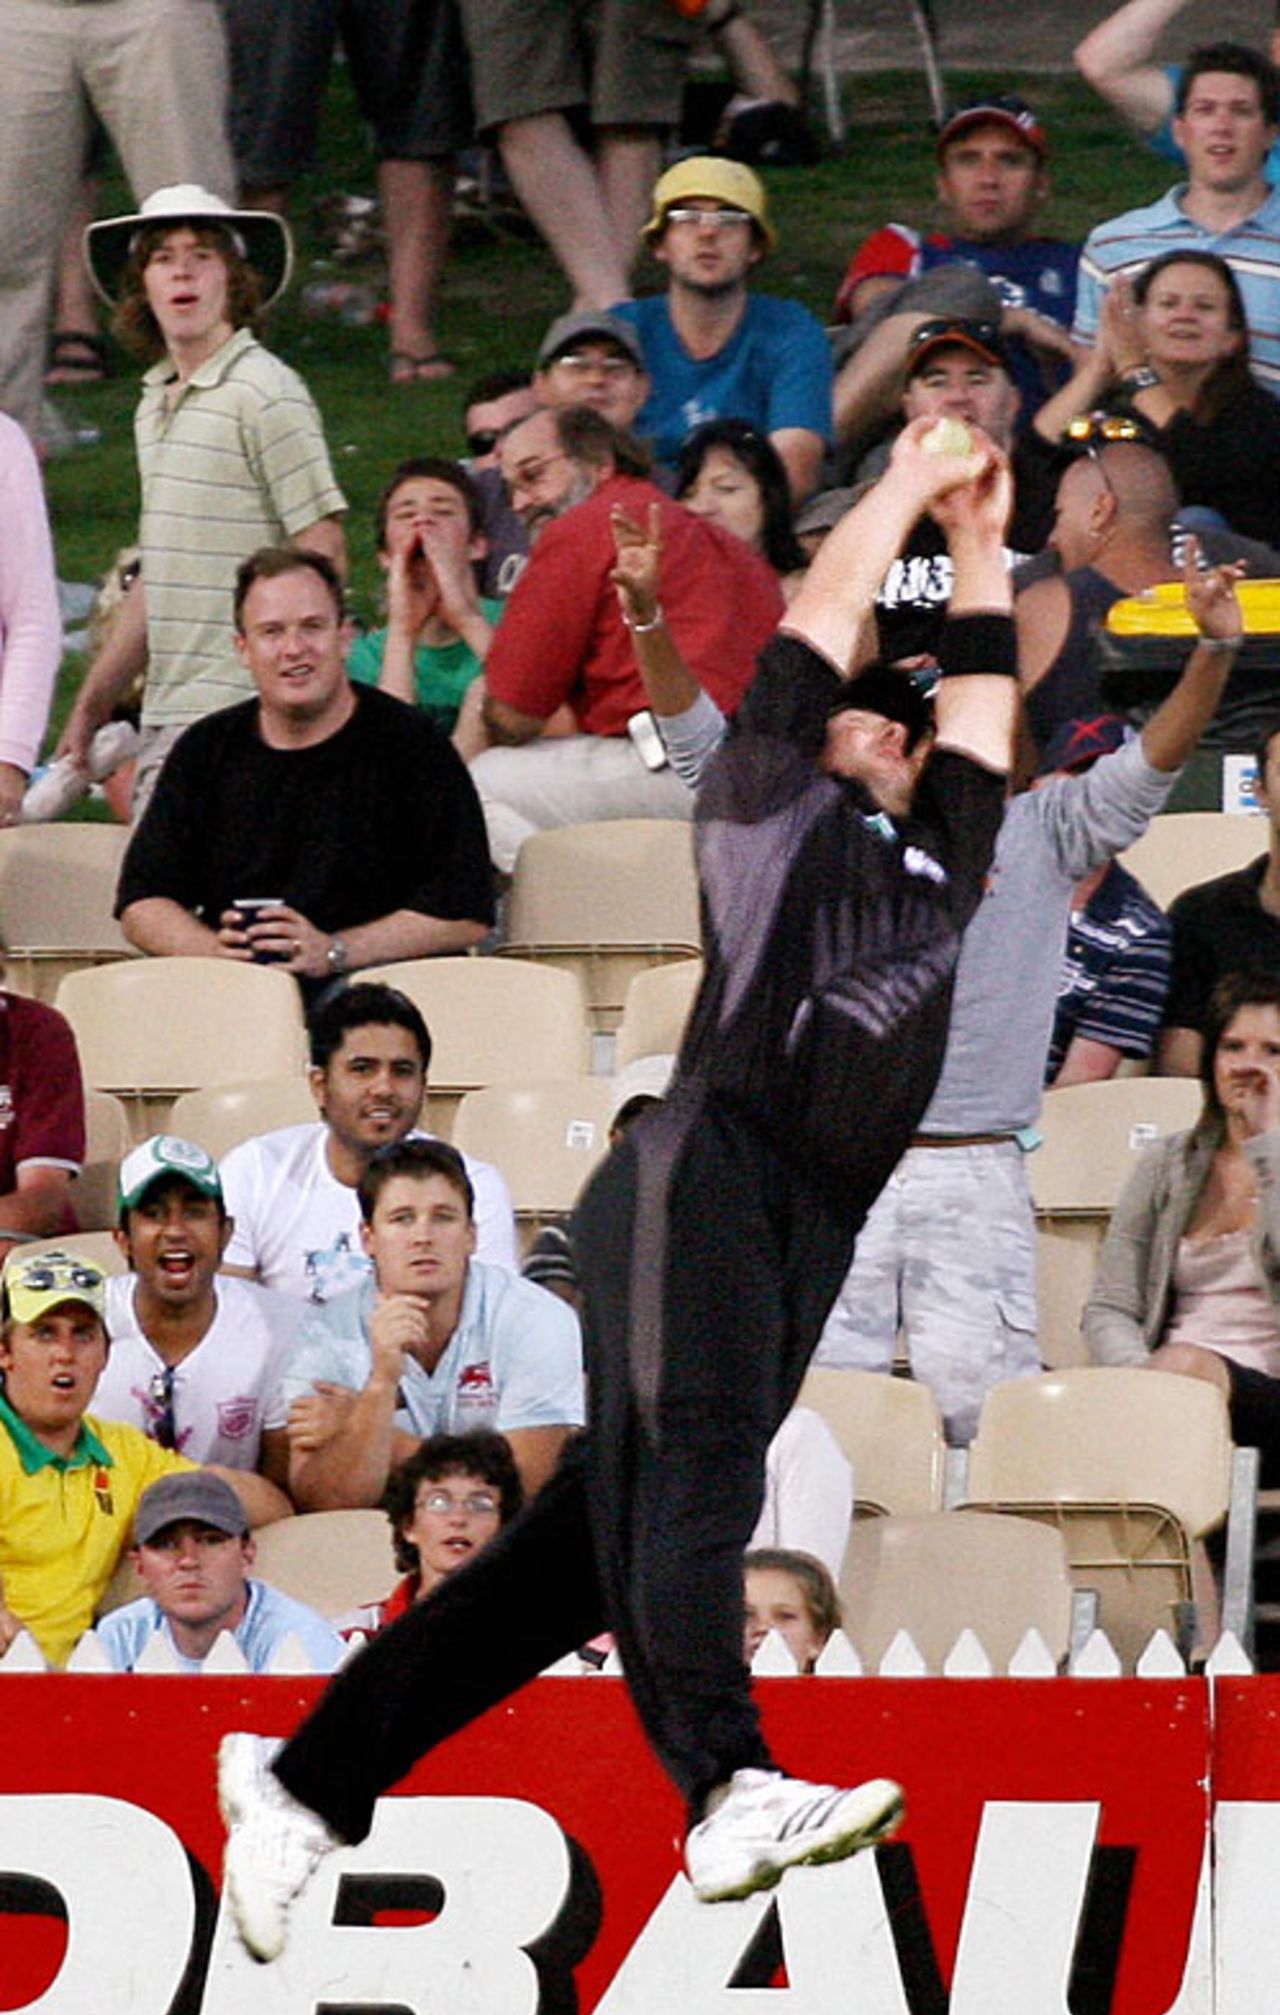 Mark Gillespie leaps high and takes a stunning catch to dismiss Ed Joyce, England v New Zealand, CB Series, Adelaide, January 23, 2007